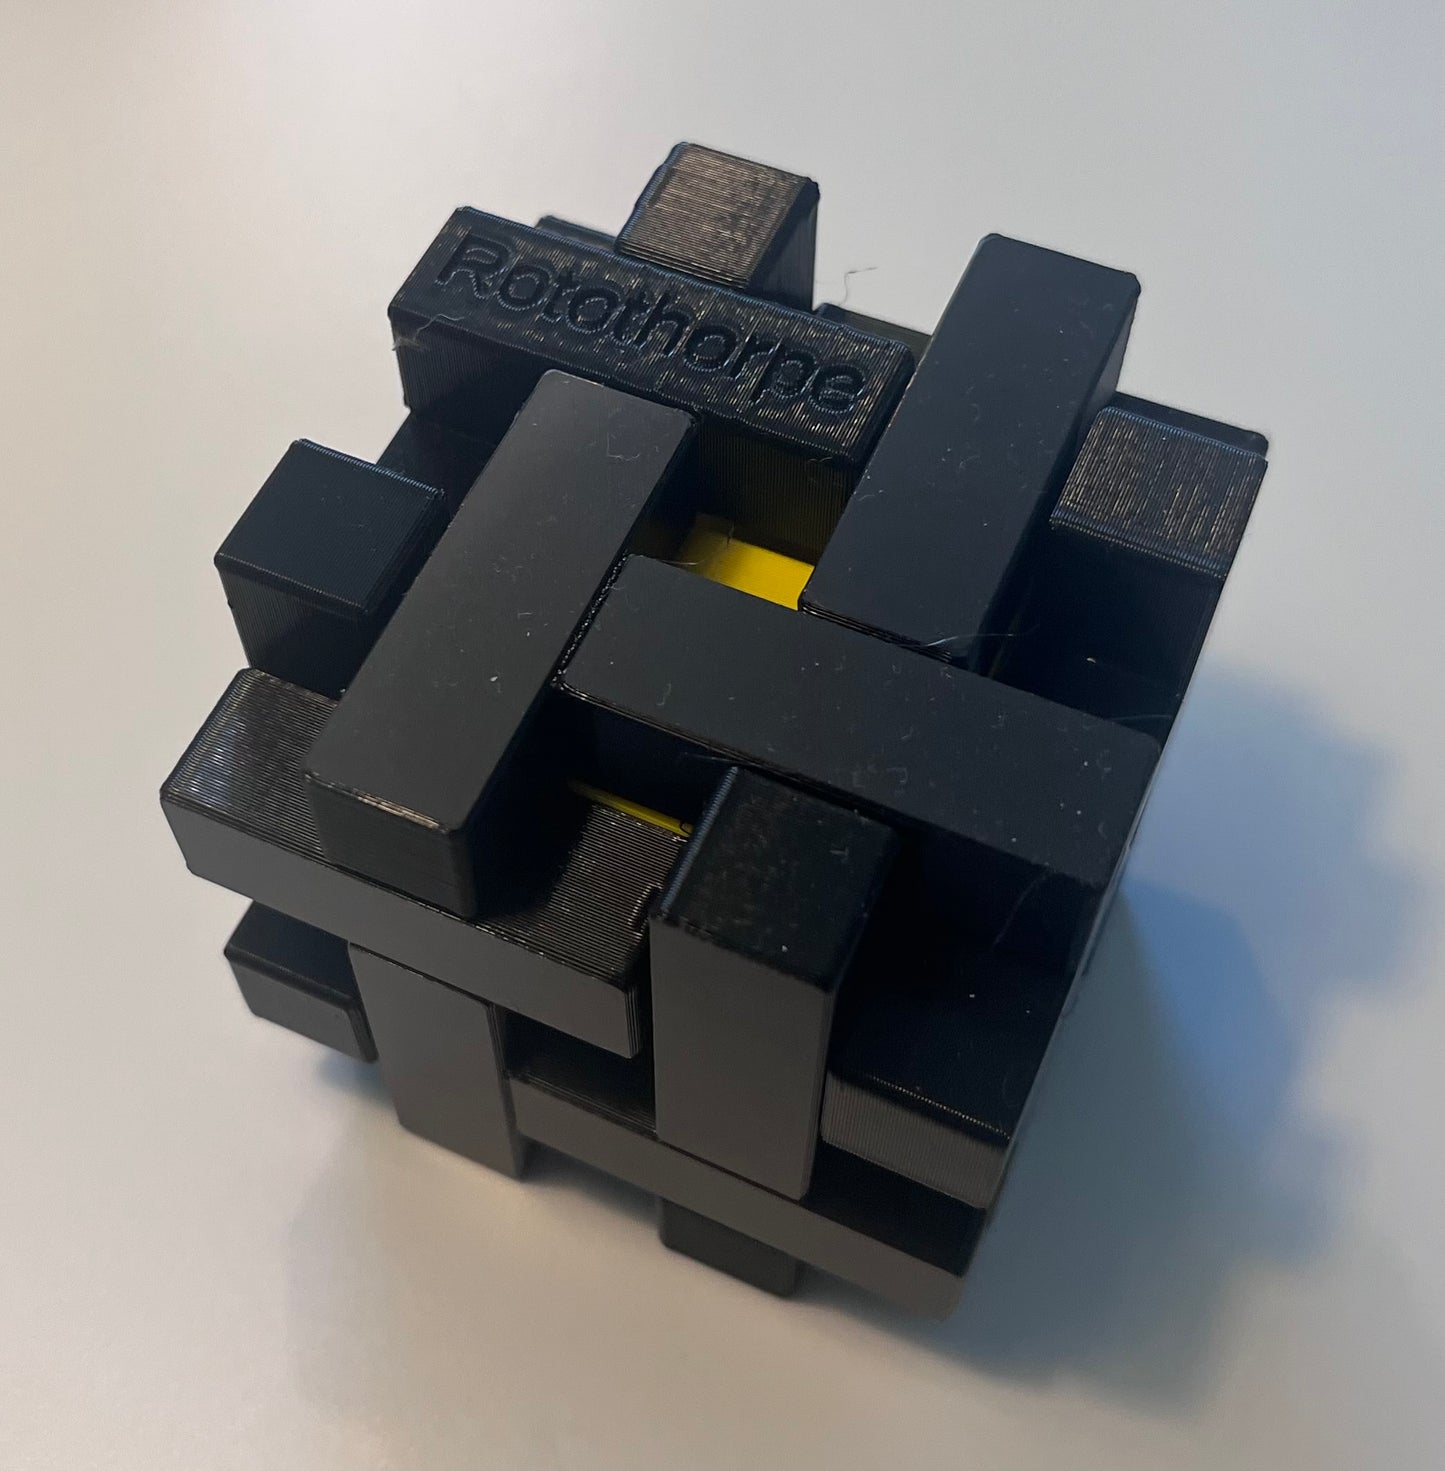 Download Volume 1 of 3D Printable STL Files for 6 5x5x5 Turning Interlocking Cube Puzzles